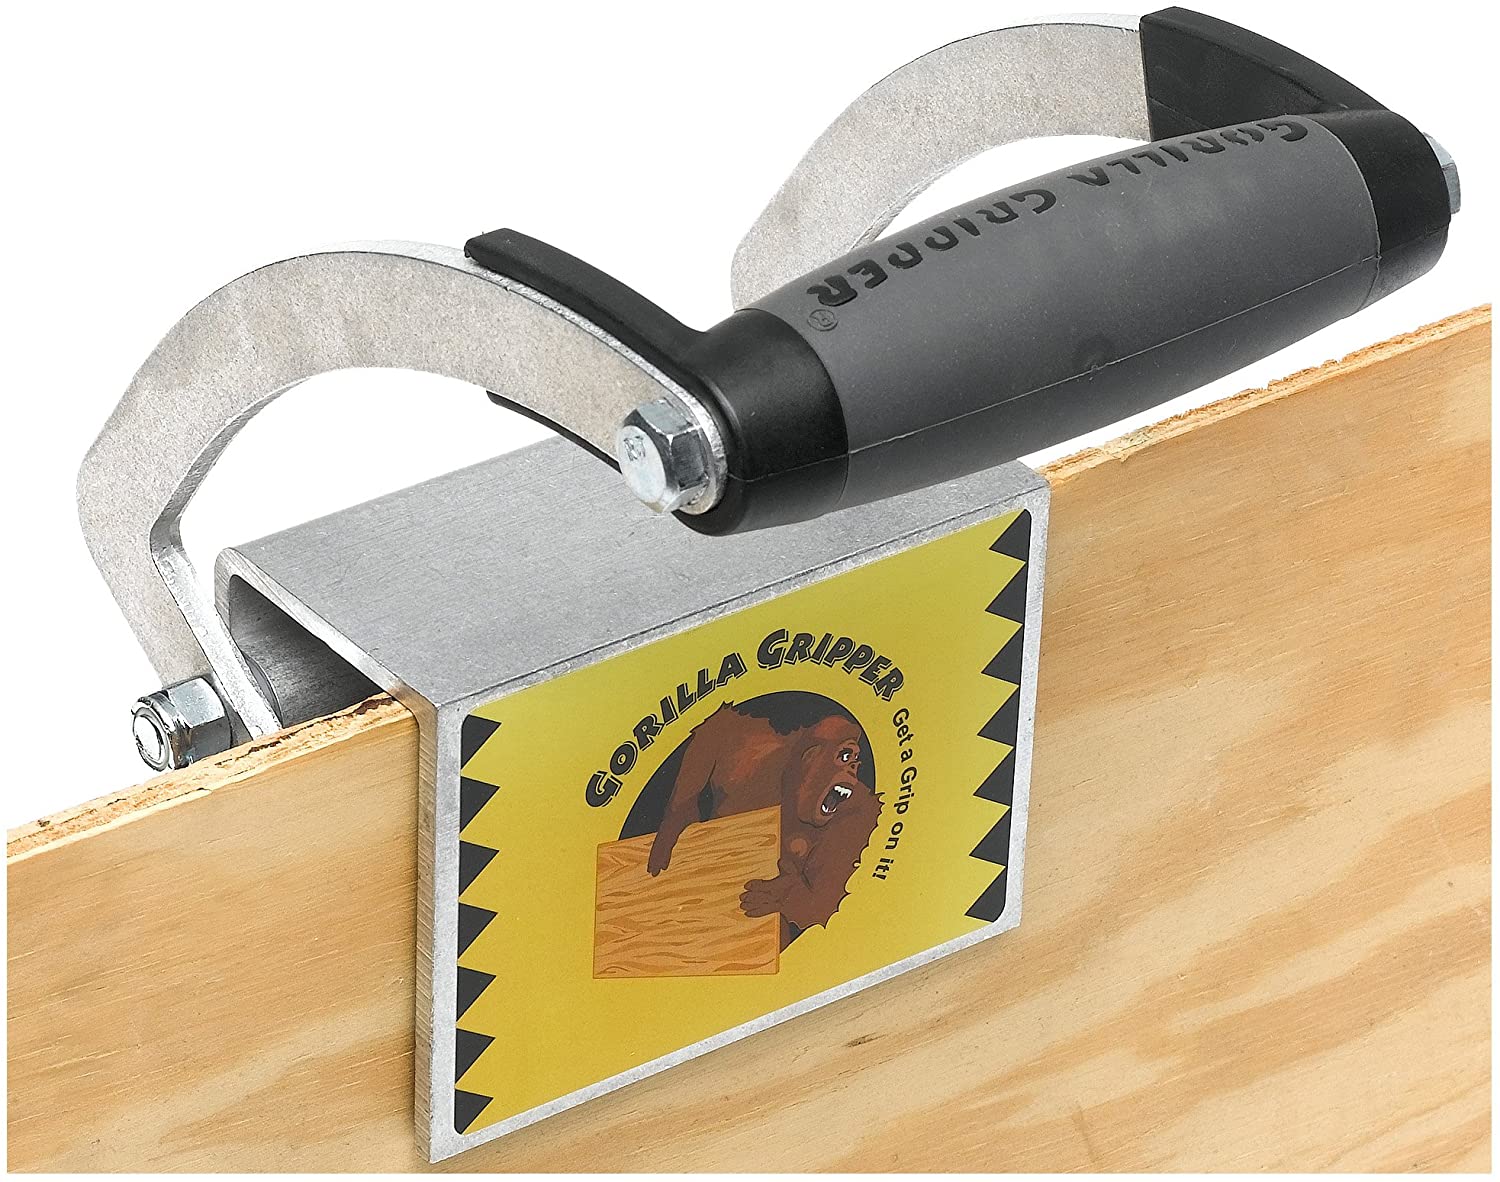 Gorilla Gripper - Clamp lets you easily haul around heavy slabs of wood or drywall by yourself - how to Carry heavy panels with 1 person